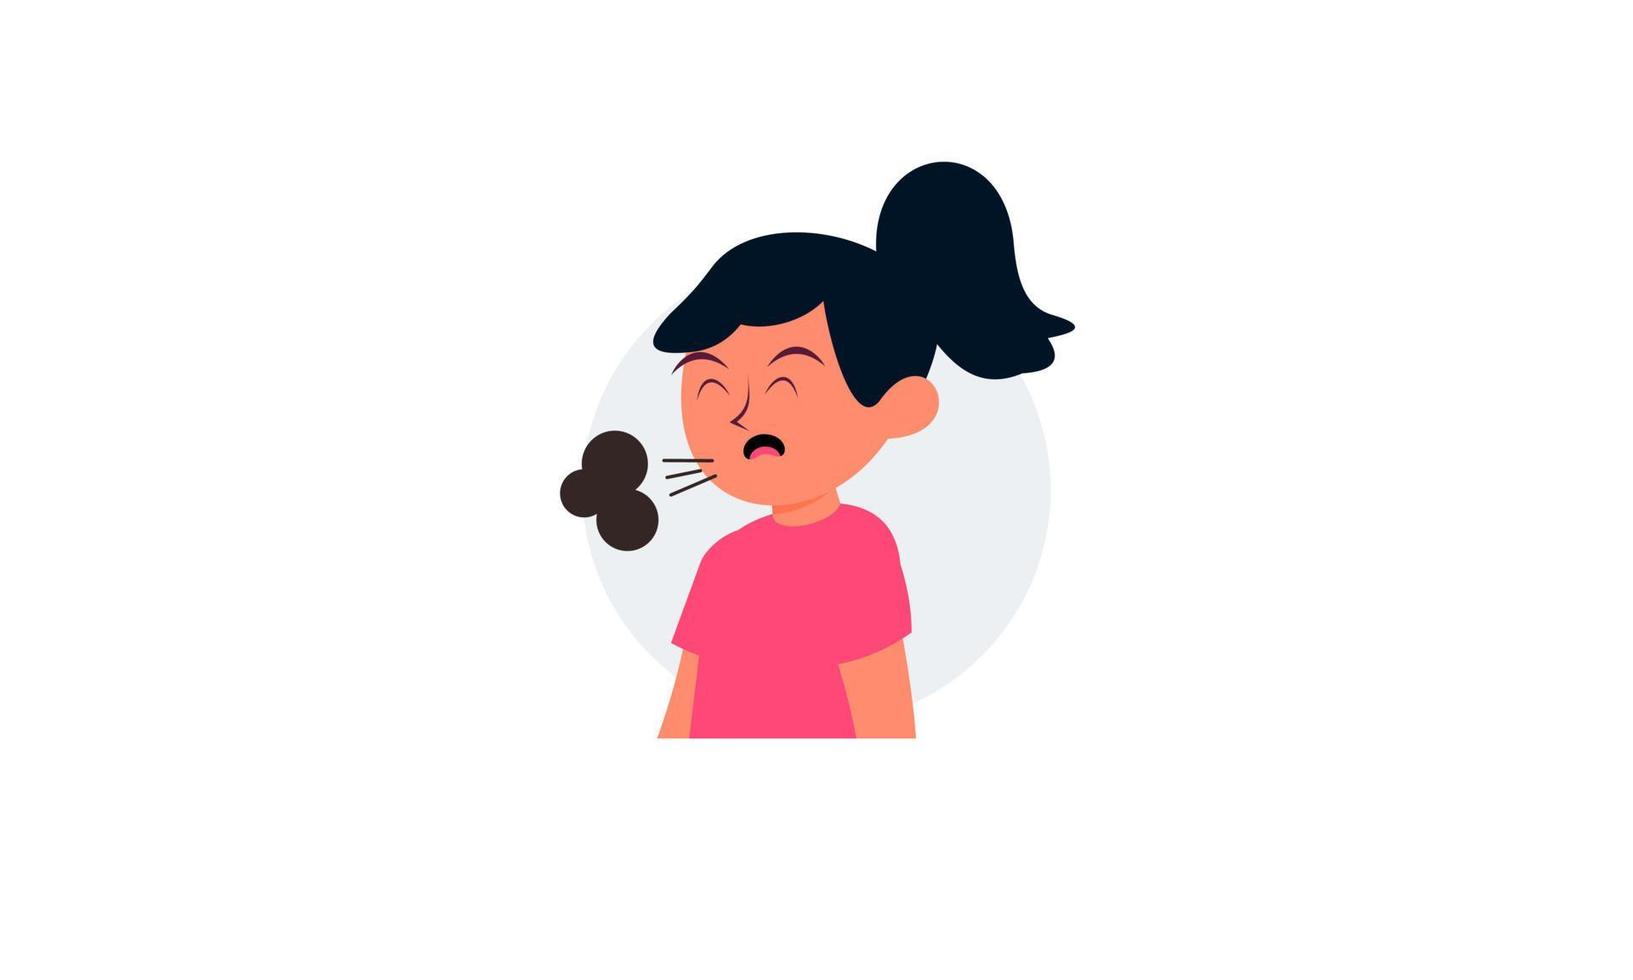 Kid character sneezing and coughing illustration vector